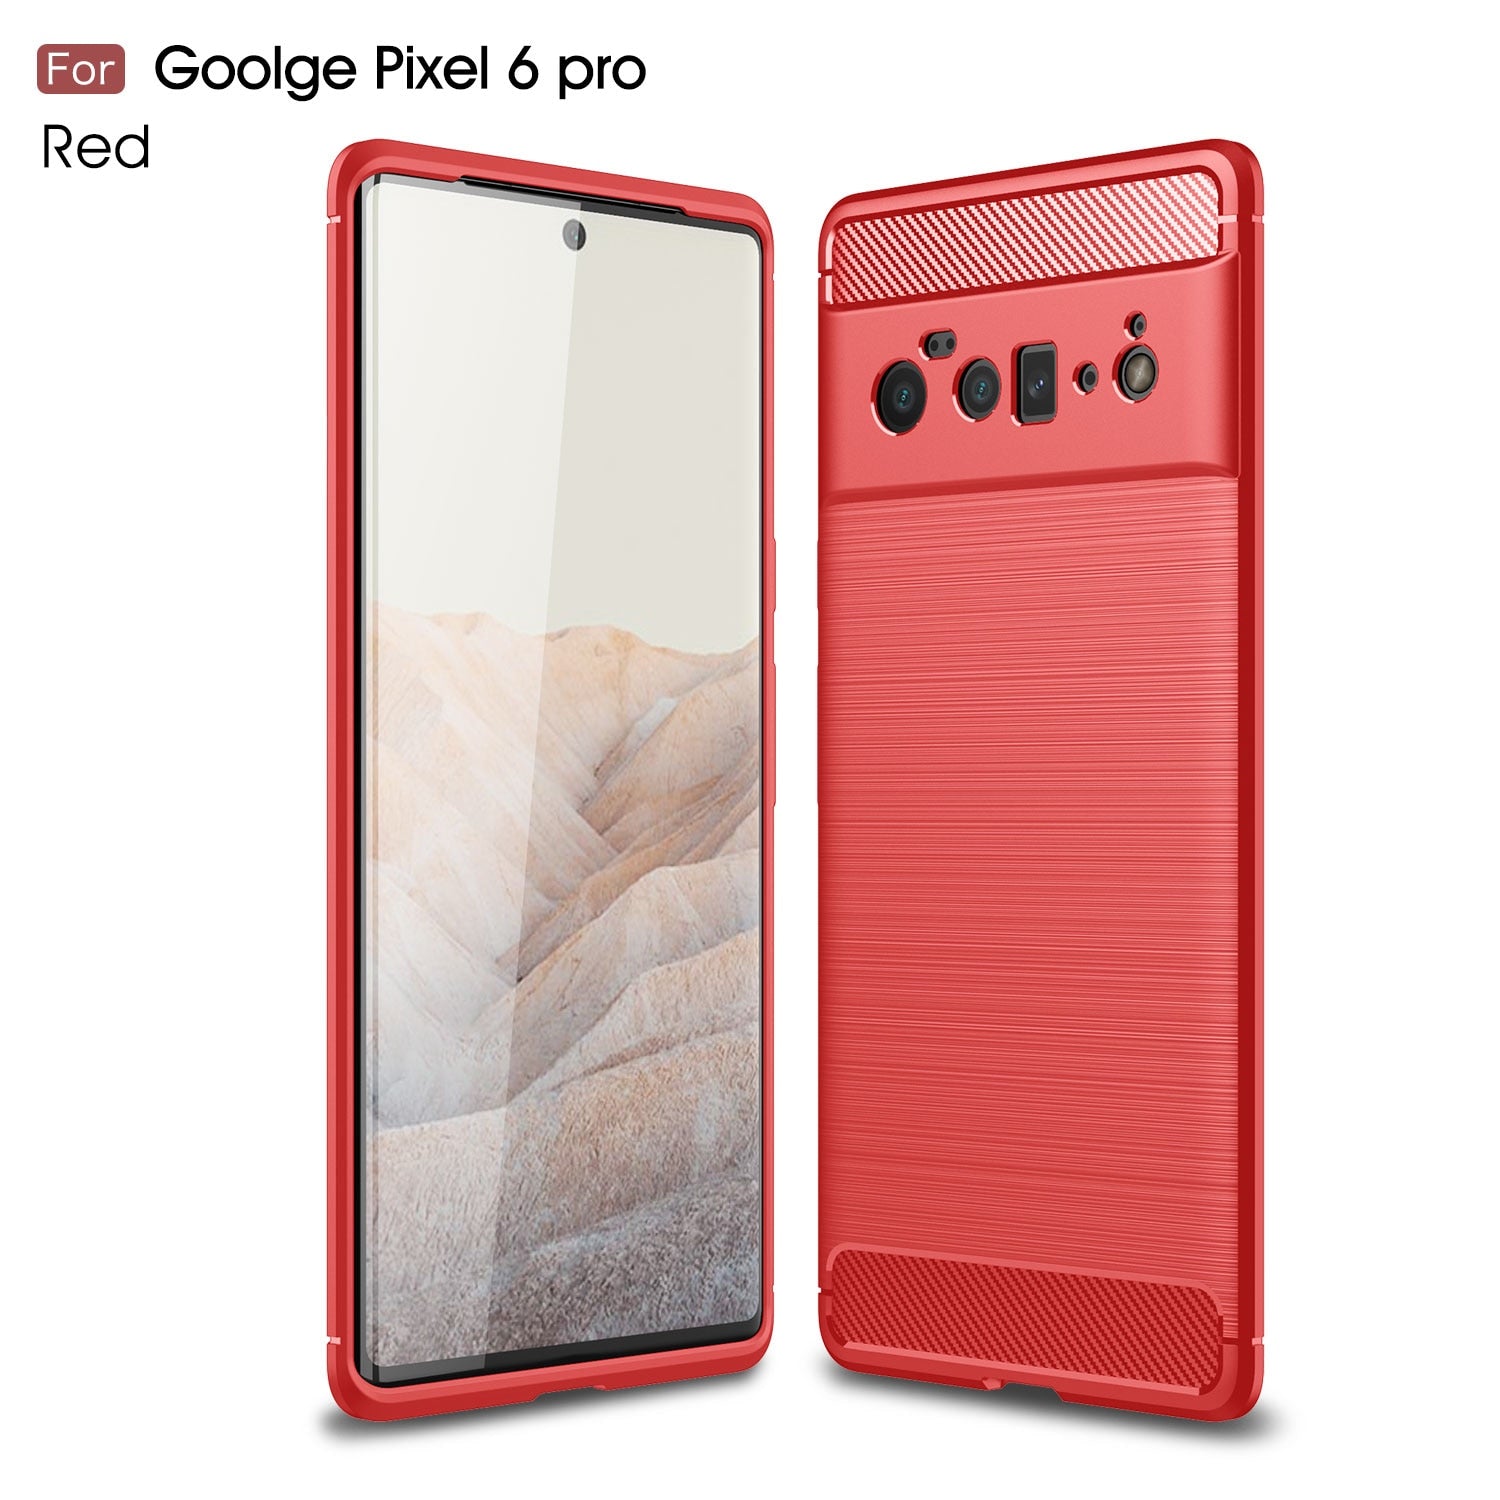 Case For Google Pixel 6 Pro Case Case Shockproof Cover For Pixel 3A 4A 5A 6 Pro 5G Cover TPU Protective Phone Back Case Pixel 6 Pro - 0 Pixel 3 / Red / United States Find Epic Store